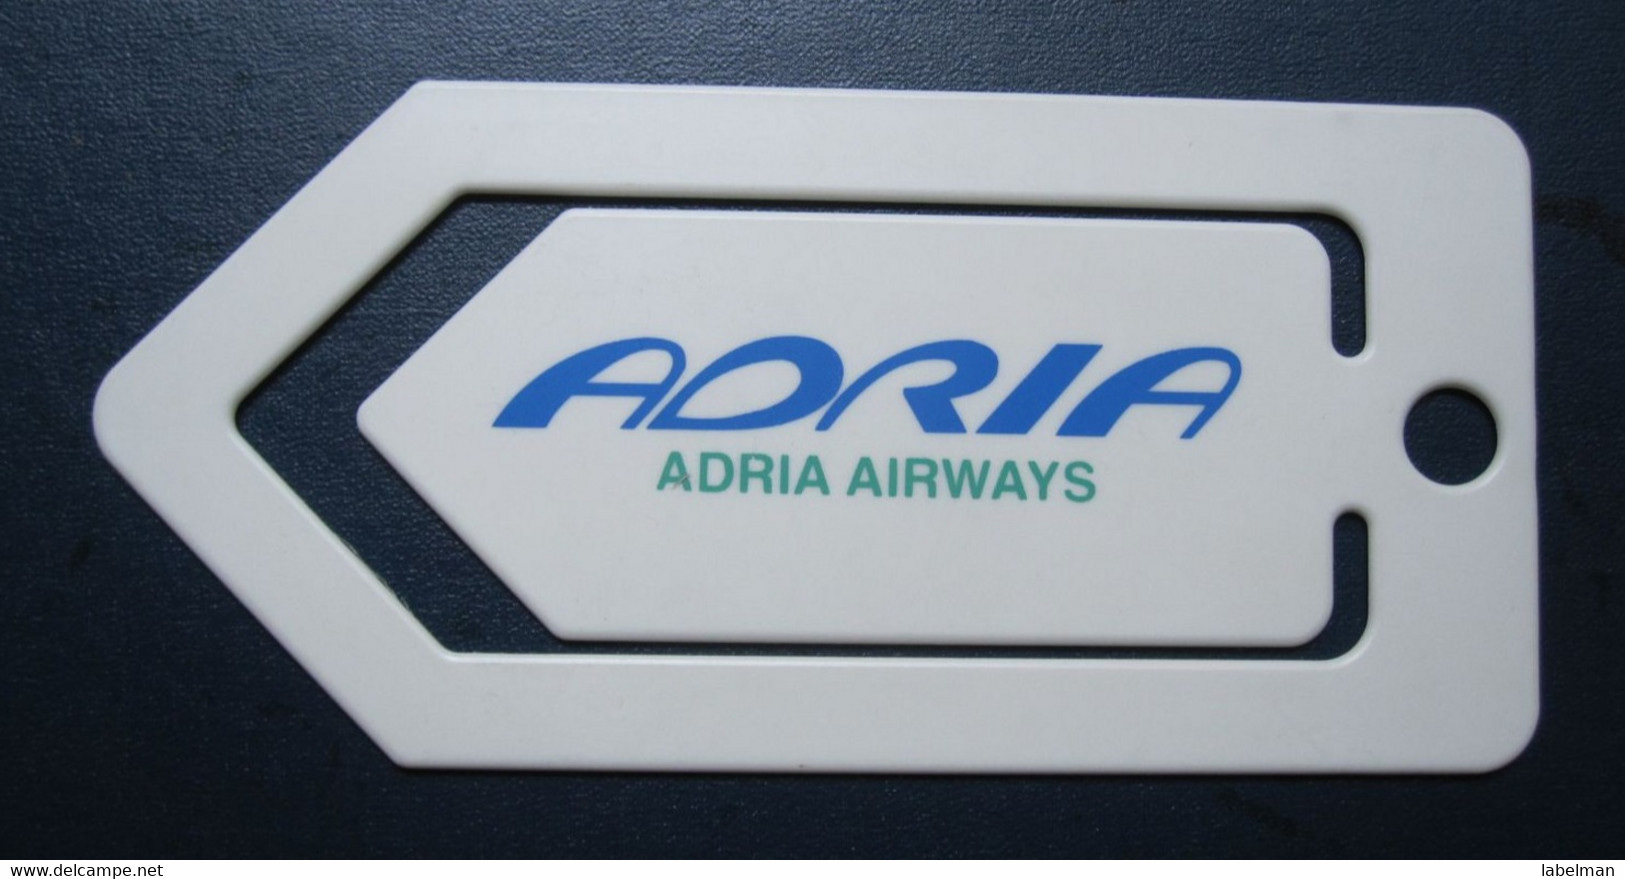 SLOVENIA ADRIA AVIOPROMET XL CLIP ADVERTISING AIRWAYS AIRLINE STICKER LABEL TAG LUGGAGE BUGGAGE PLANE AIRCRAFT AIRPORT - Articles De Papeterie